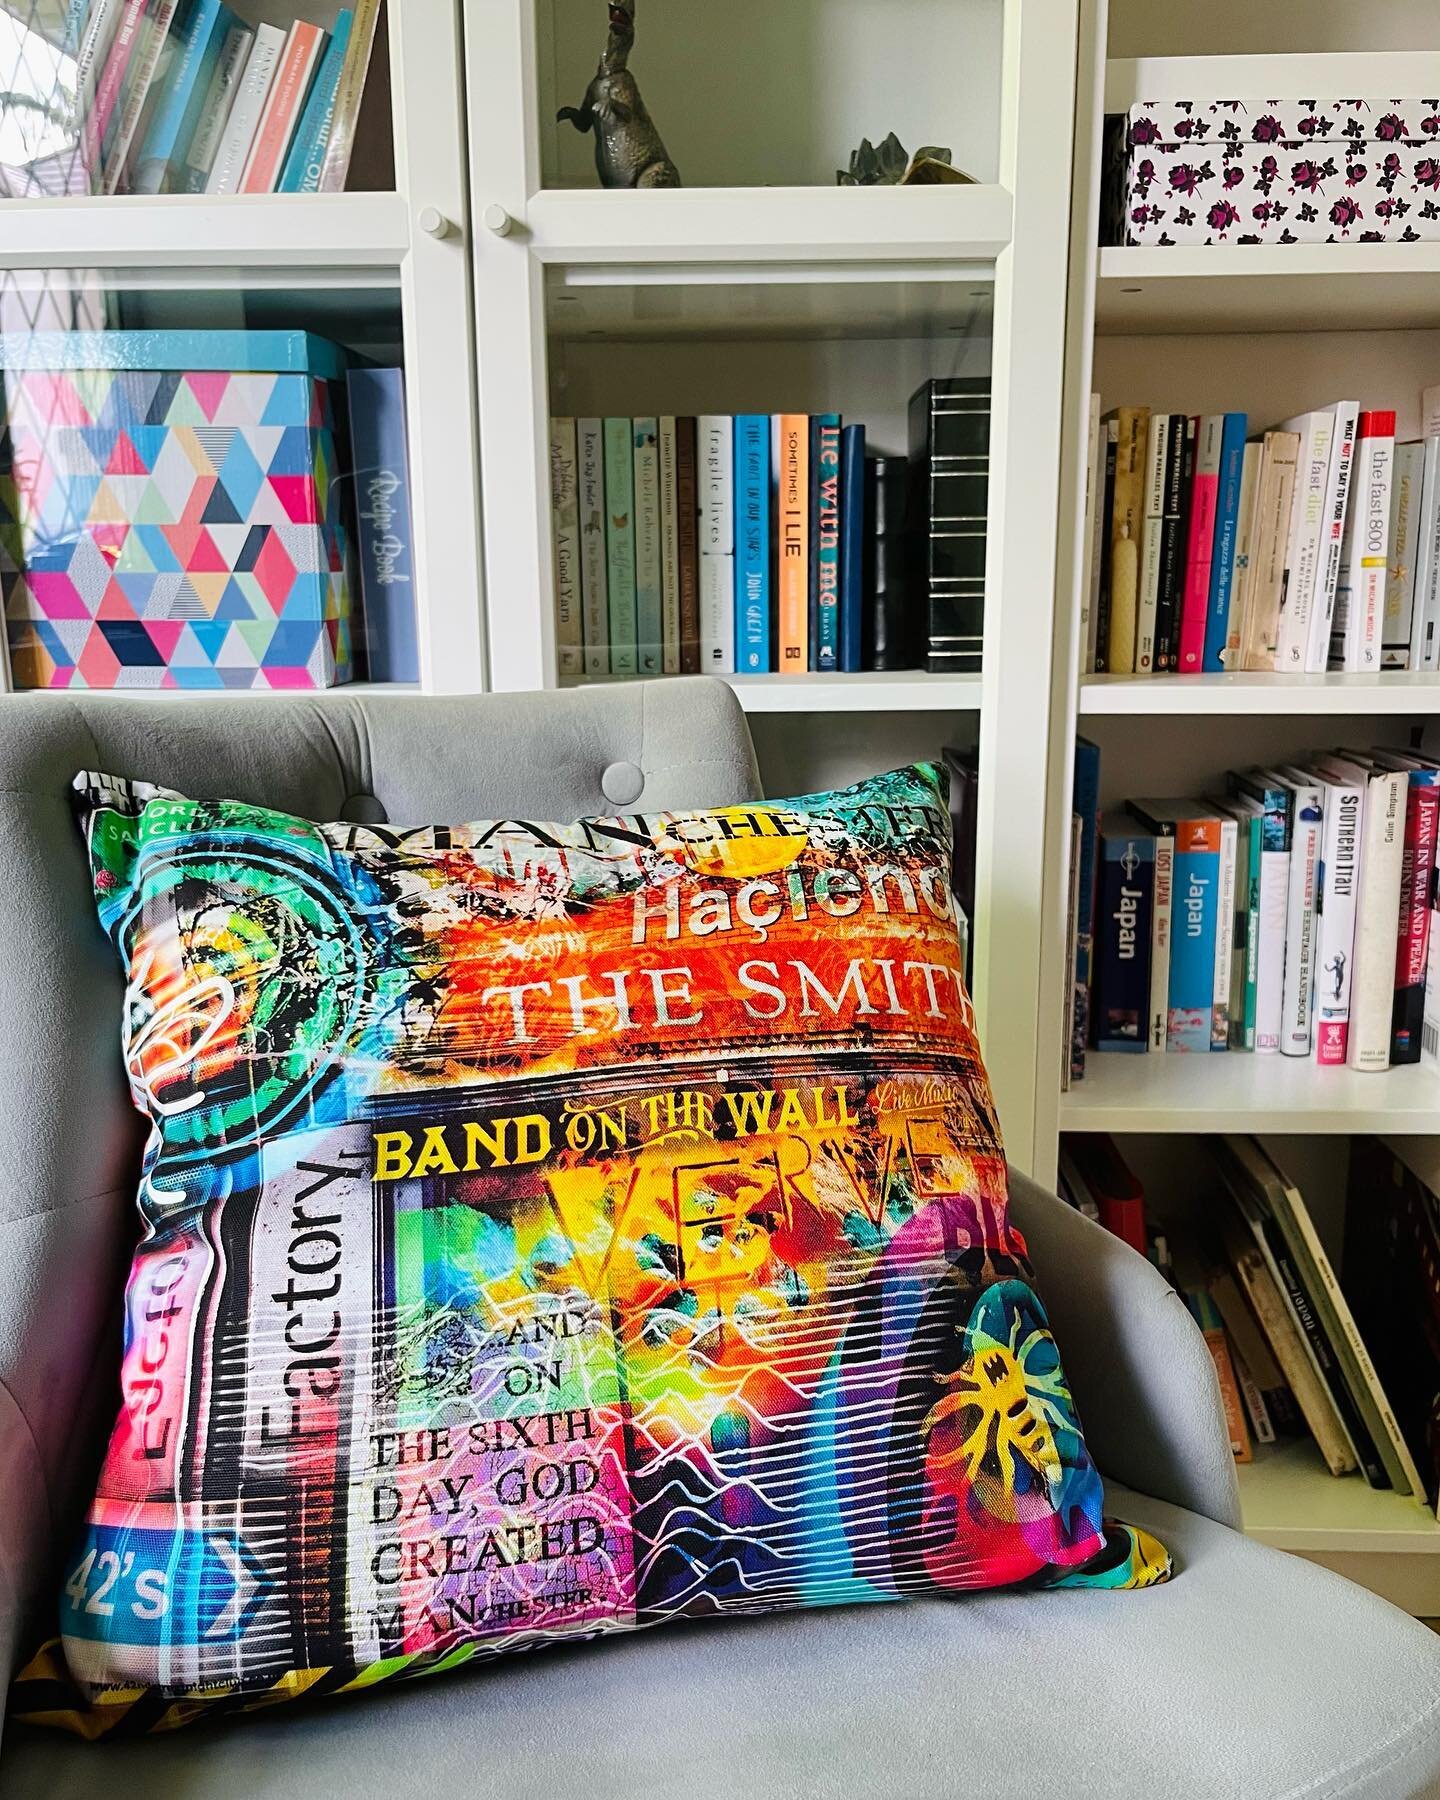 Cushions are on sale until this Sunday! 🙌

Was &pound;18, now Just &pound;13 each! 

https://www.kellyclarkephotography.com/shop/p/manchestermashupcushioncover

#manchesterprints #thesmiths #manchester #manchestermusic #oasis #theverve #manc #manche